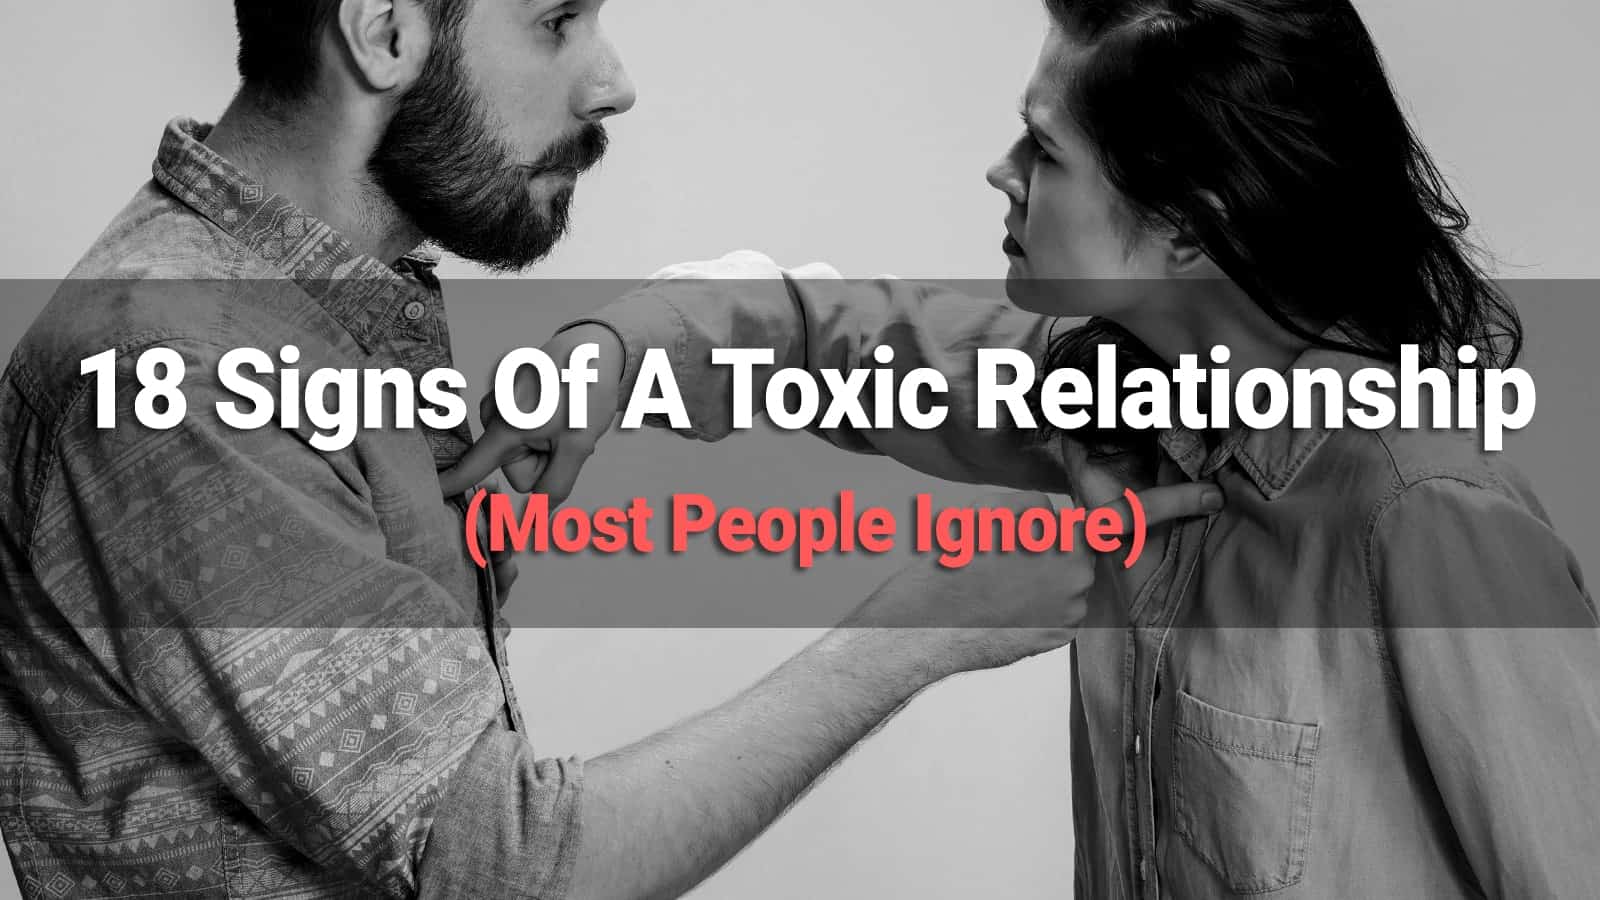 18 Signs Of A Toxic Relationship (Most People Ignore)